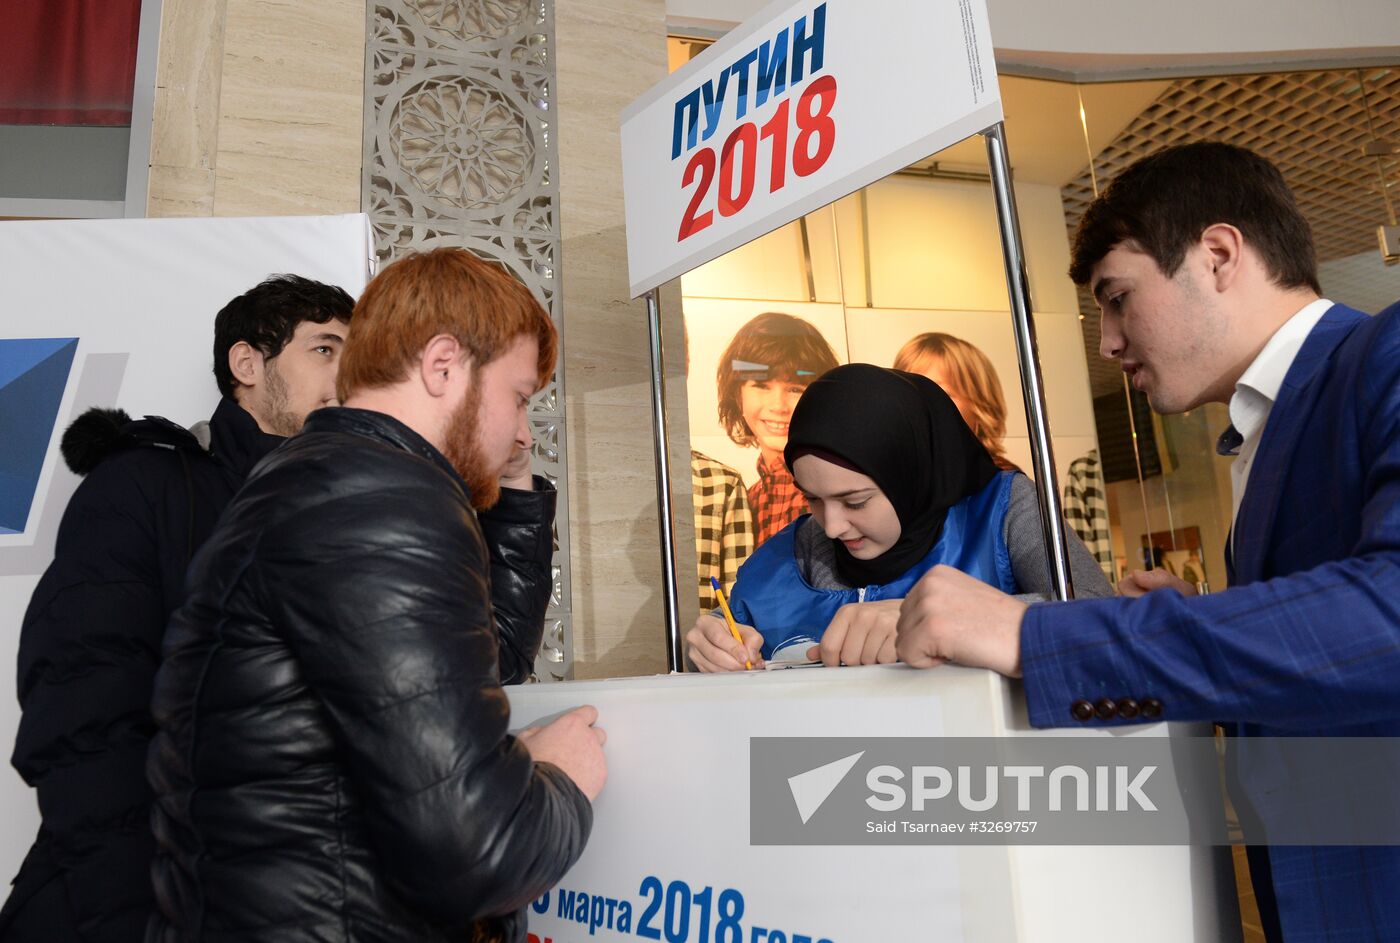 Collection of signatures supporting Vladimir Putin’s presidential bid is underway